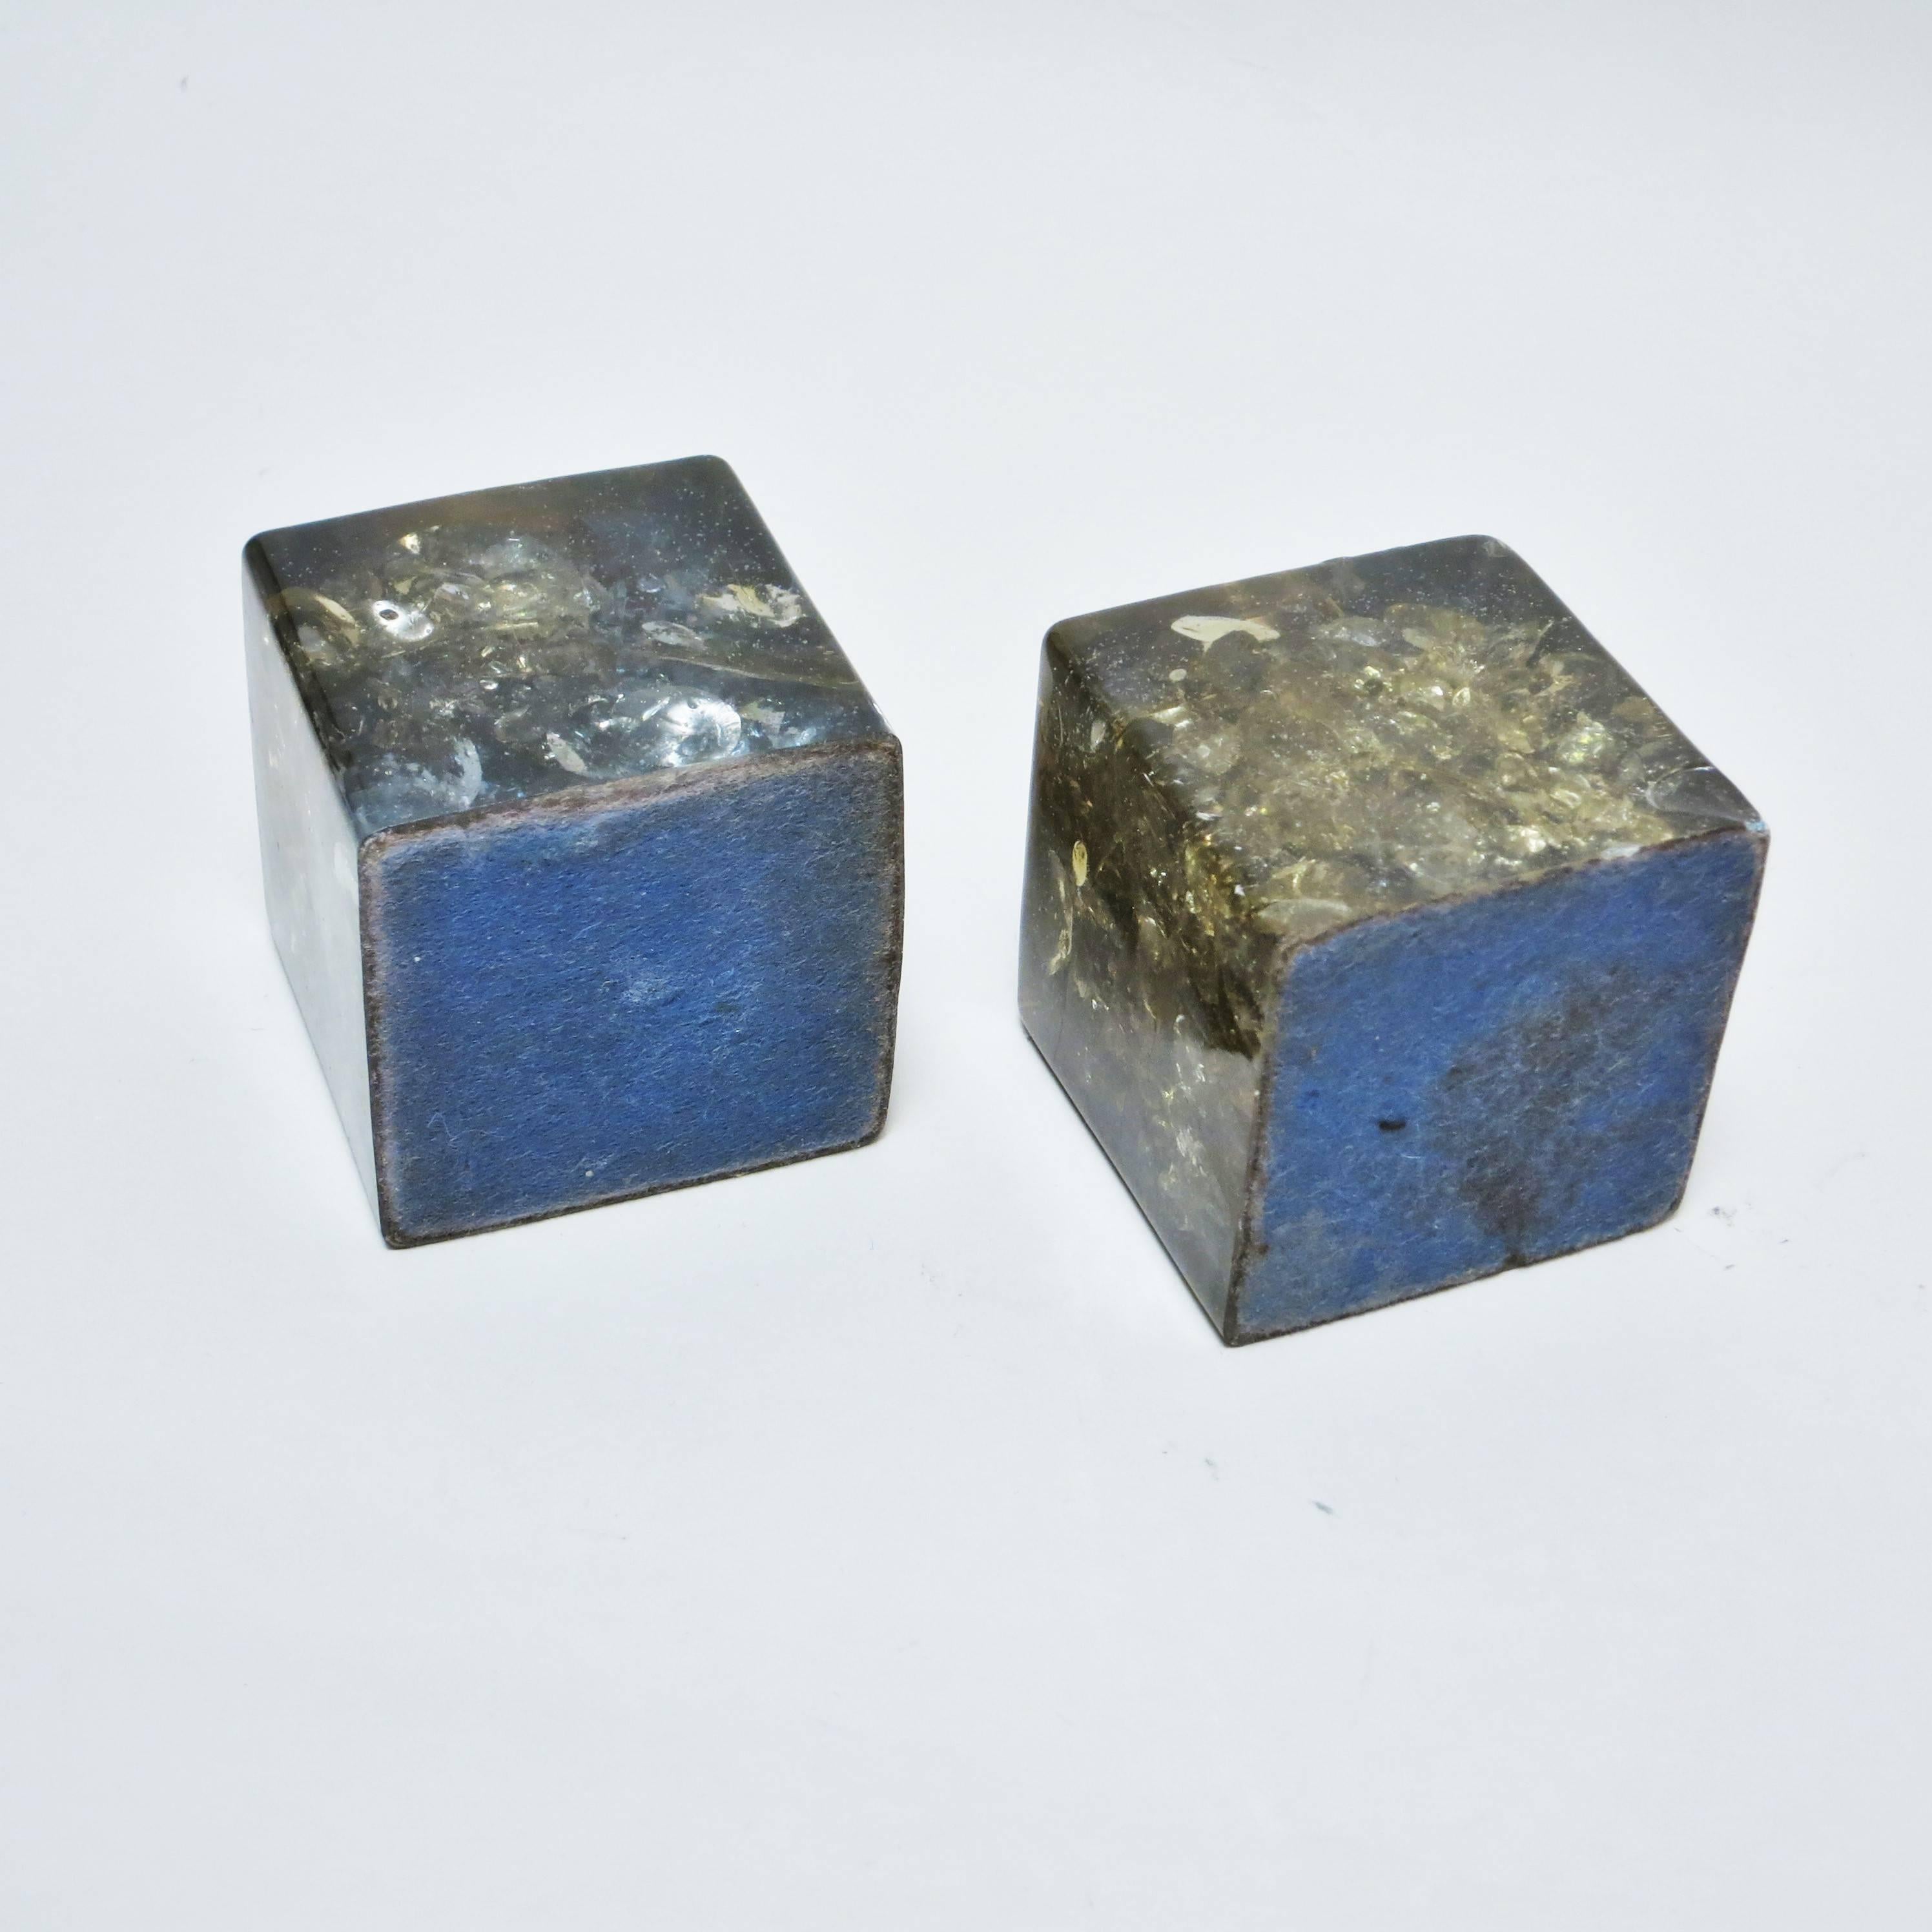 French Pair of Fractal Resin Candleholders Attributed to Giraudon